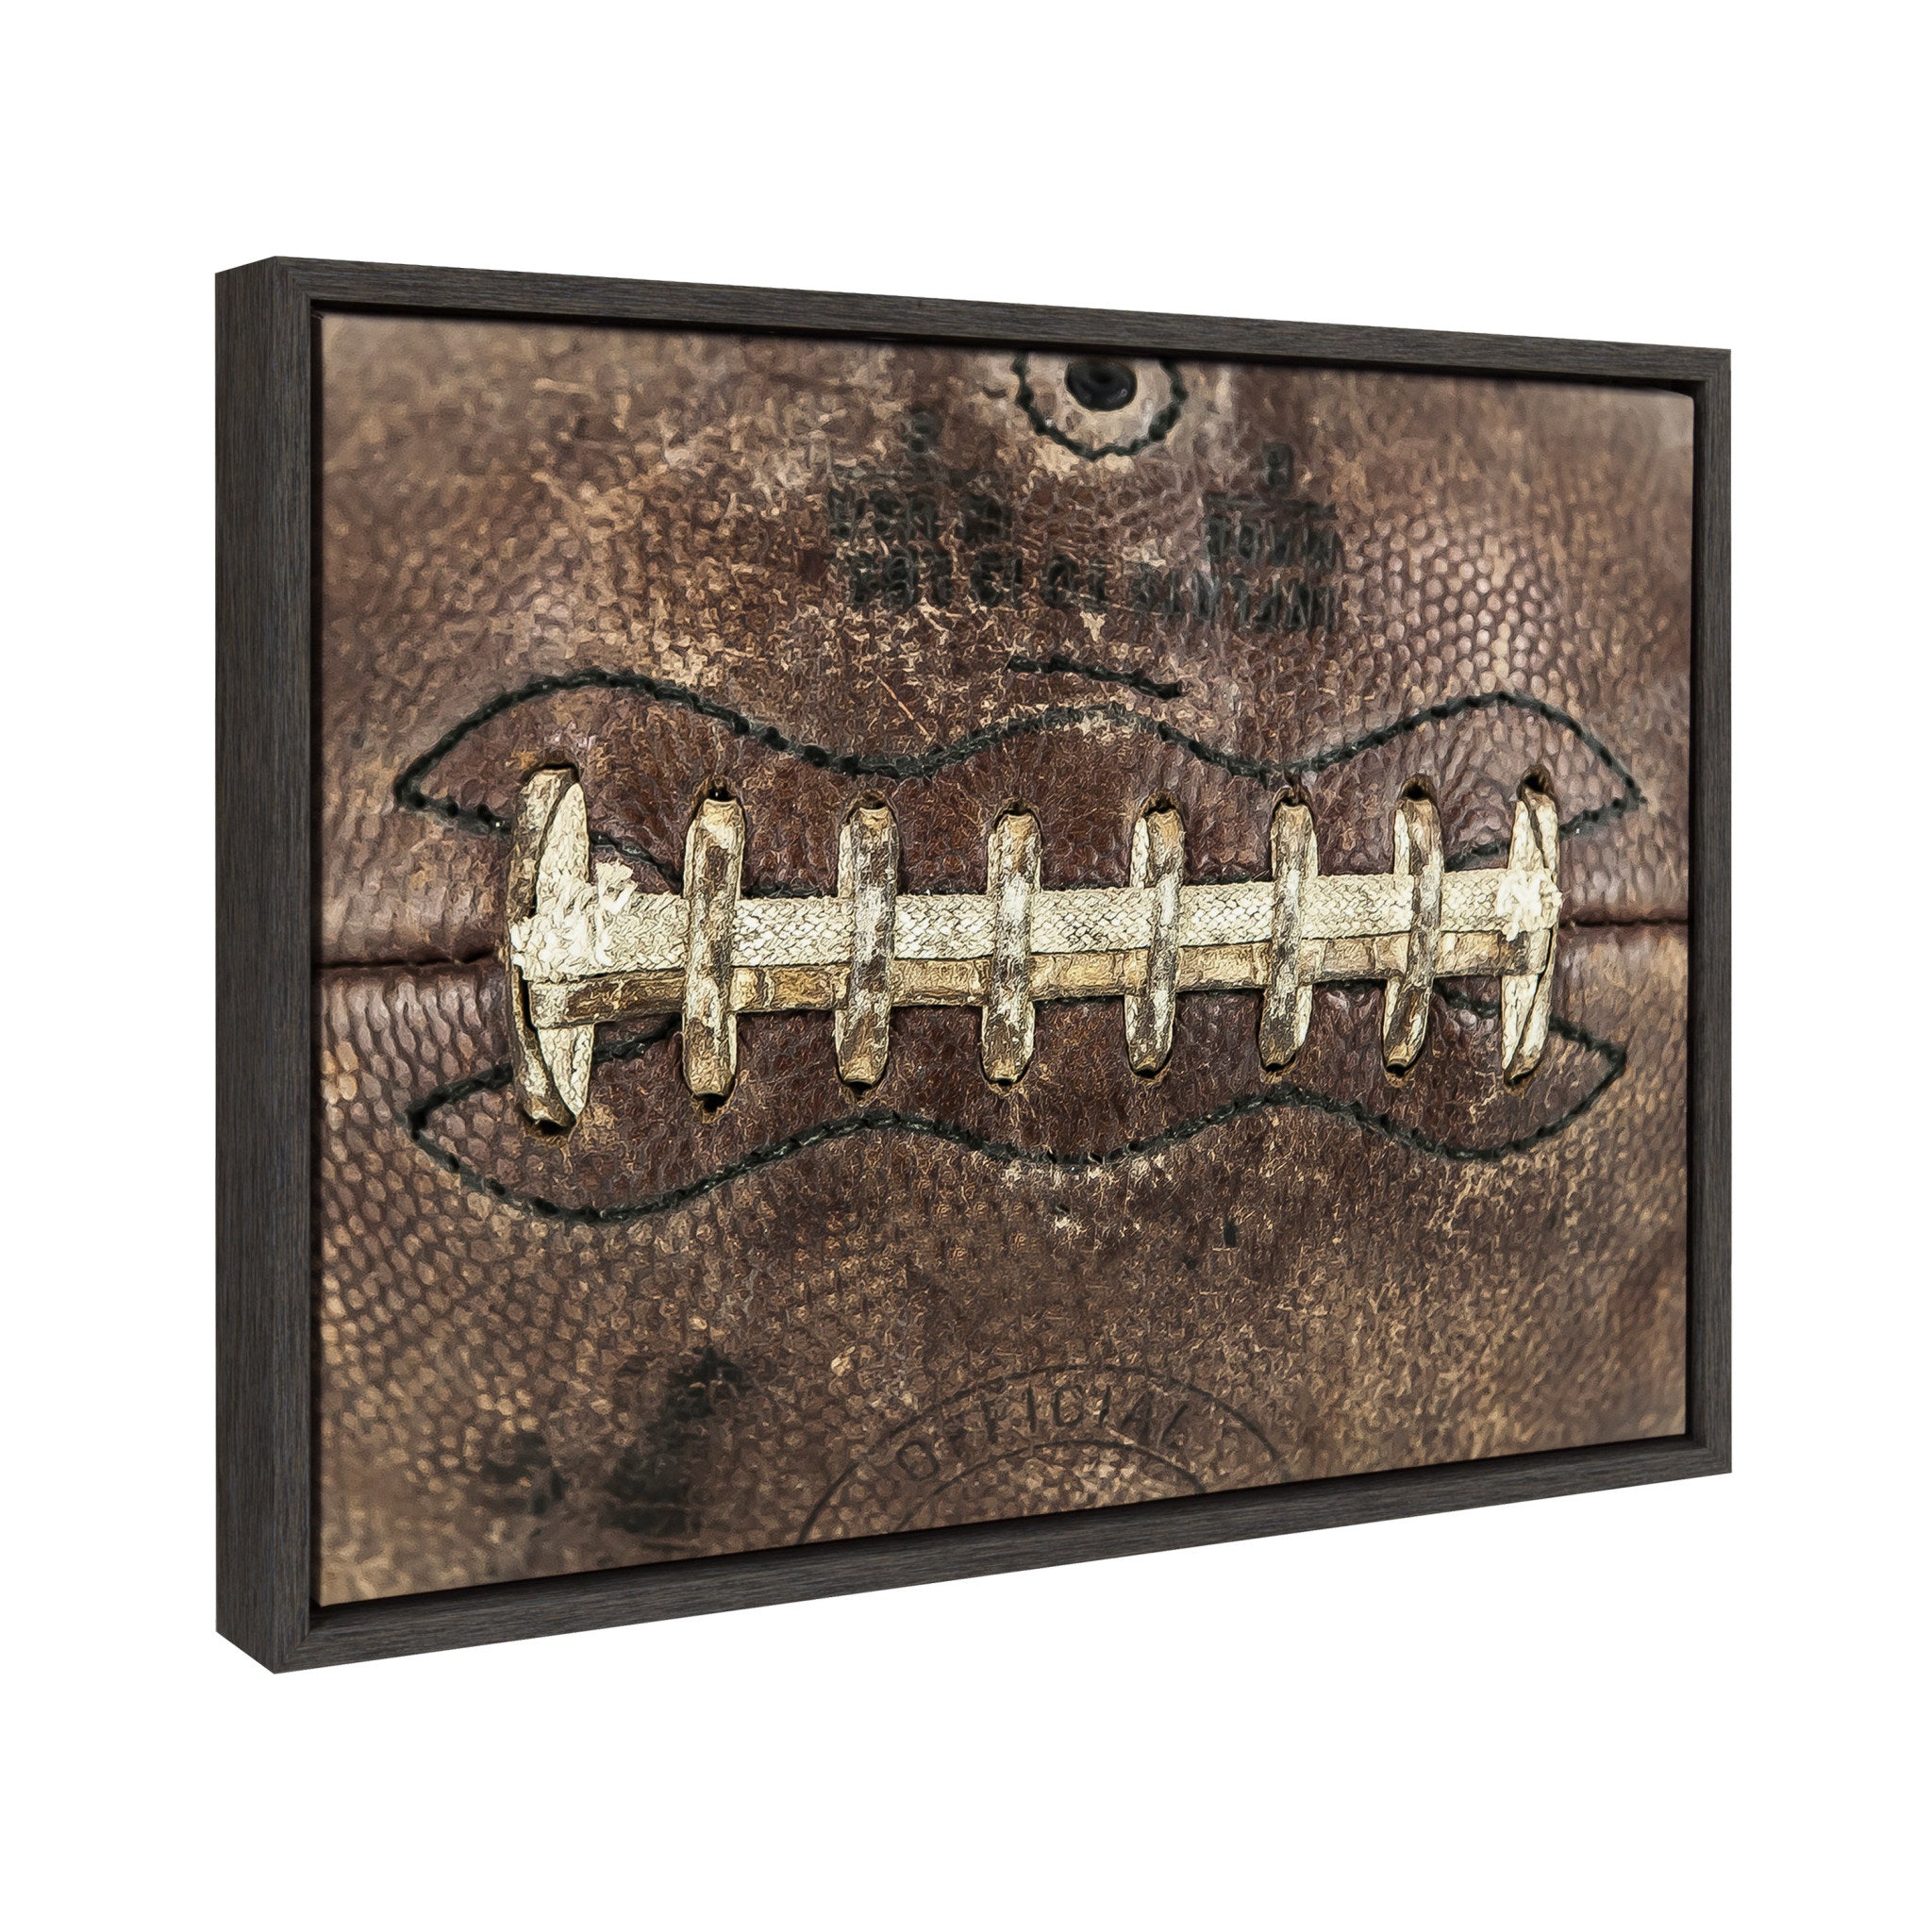 Sylvie Football Laces Framed Canvas by Shawn St. Peter